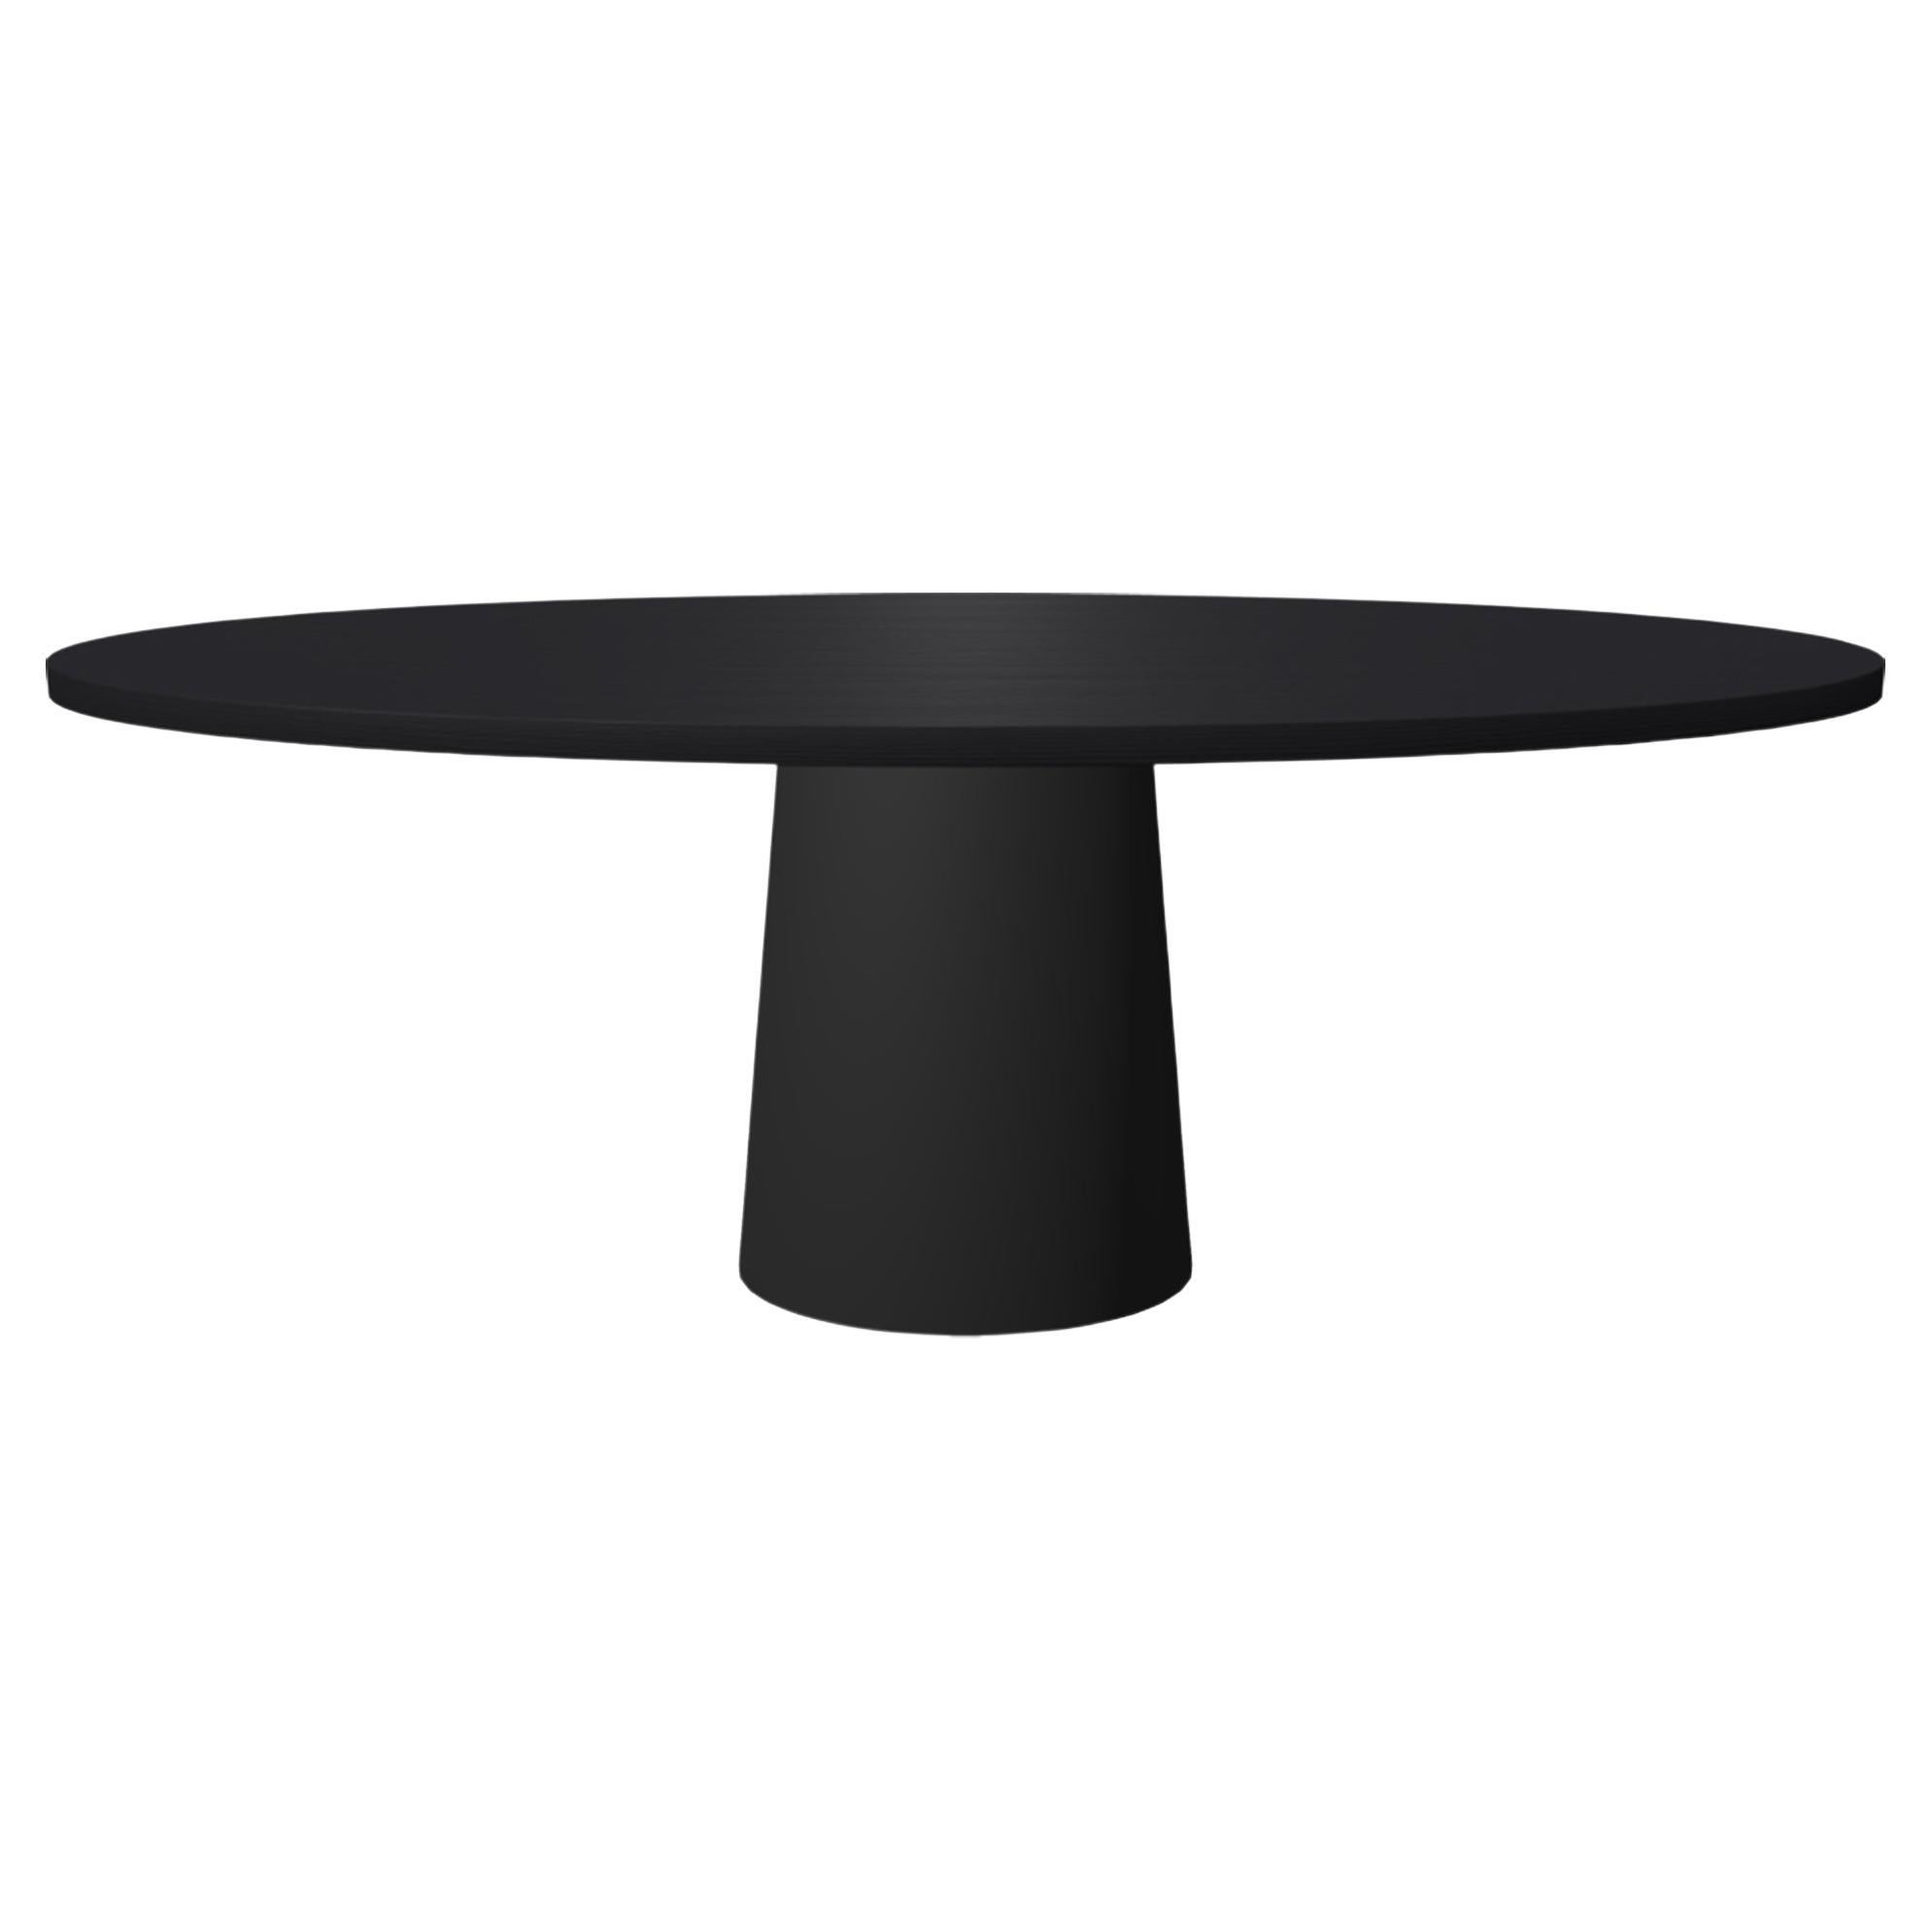 Moooi Container 210 Dining Table with Black Oak Top, Marcel Wanders Studio For Sale